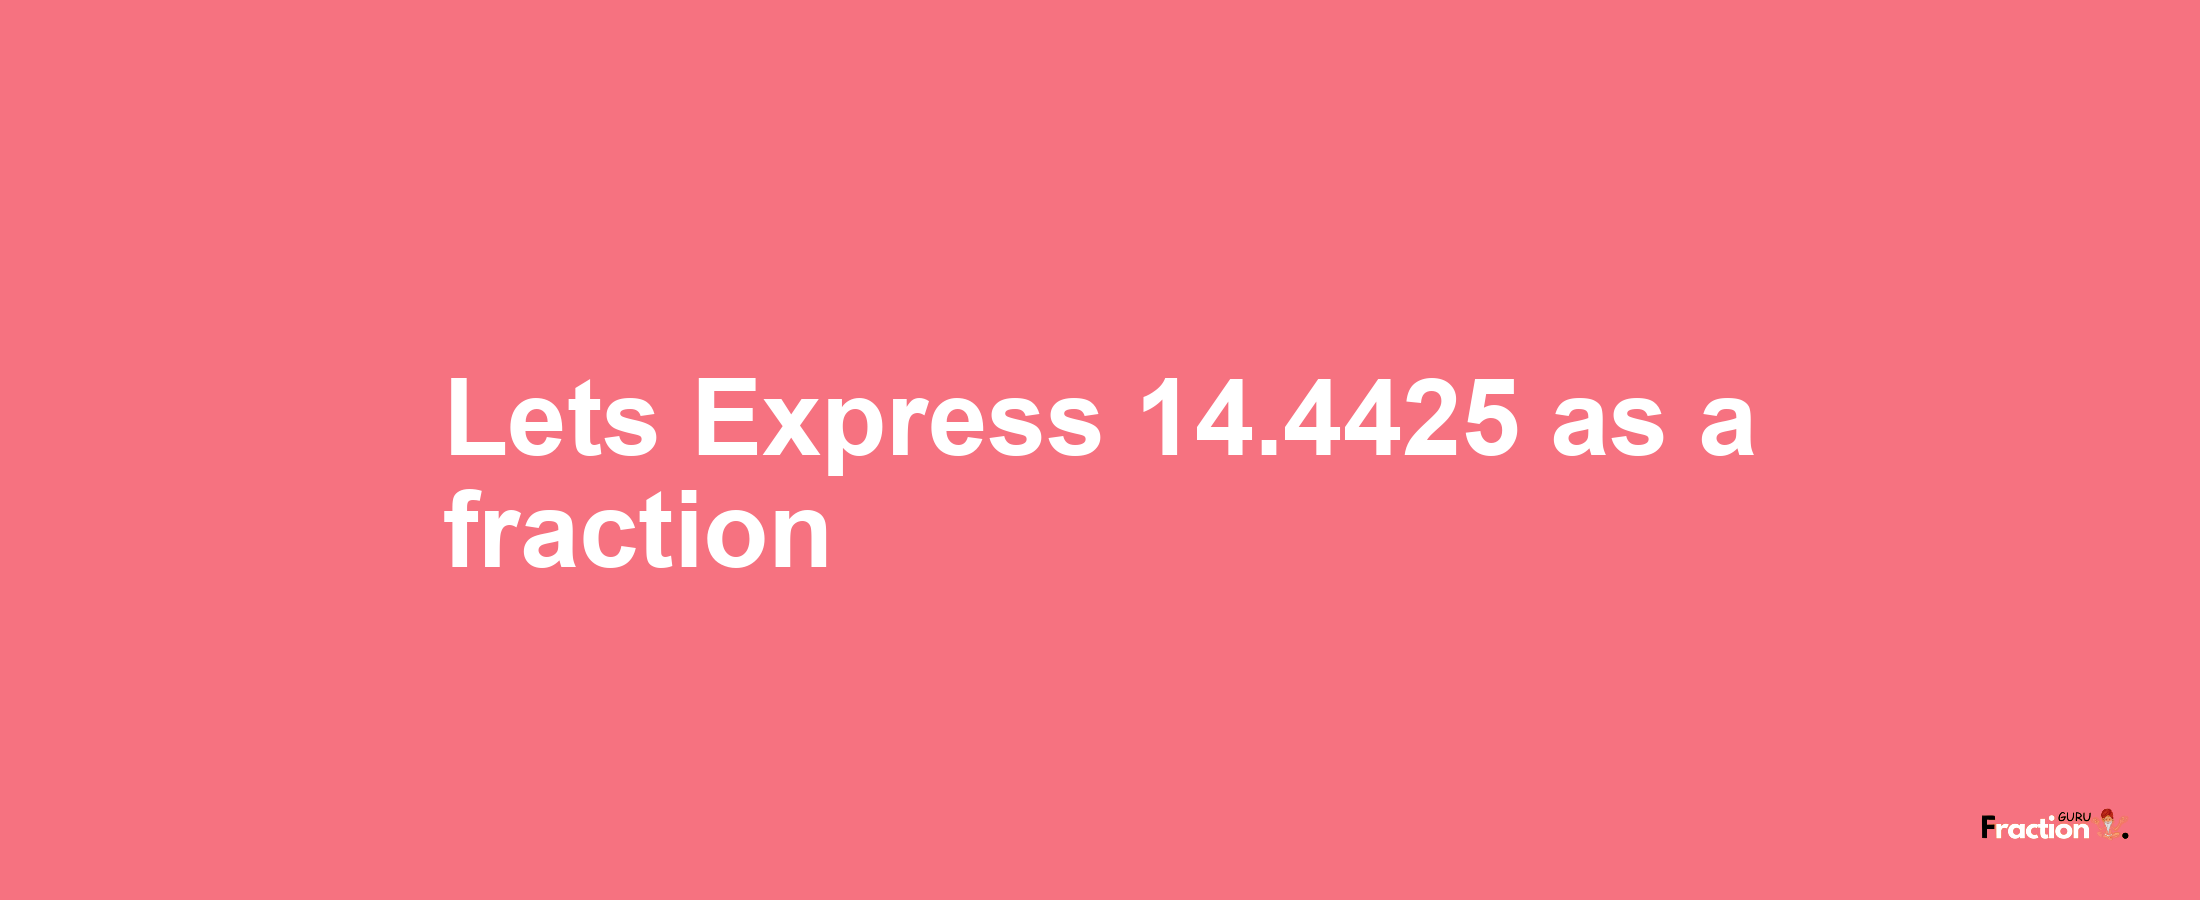 Lets Express 14.4425 as afraction